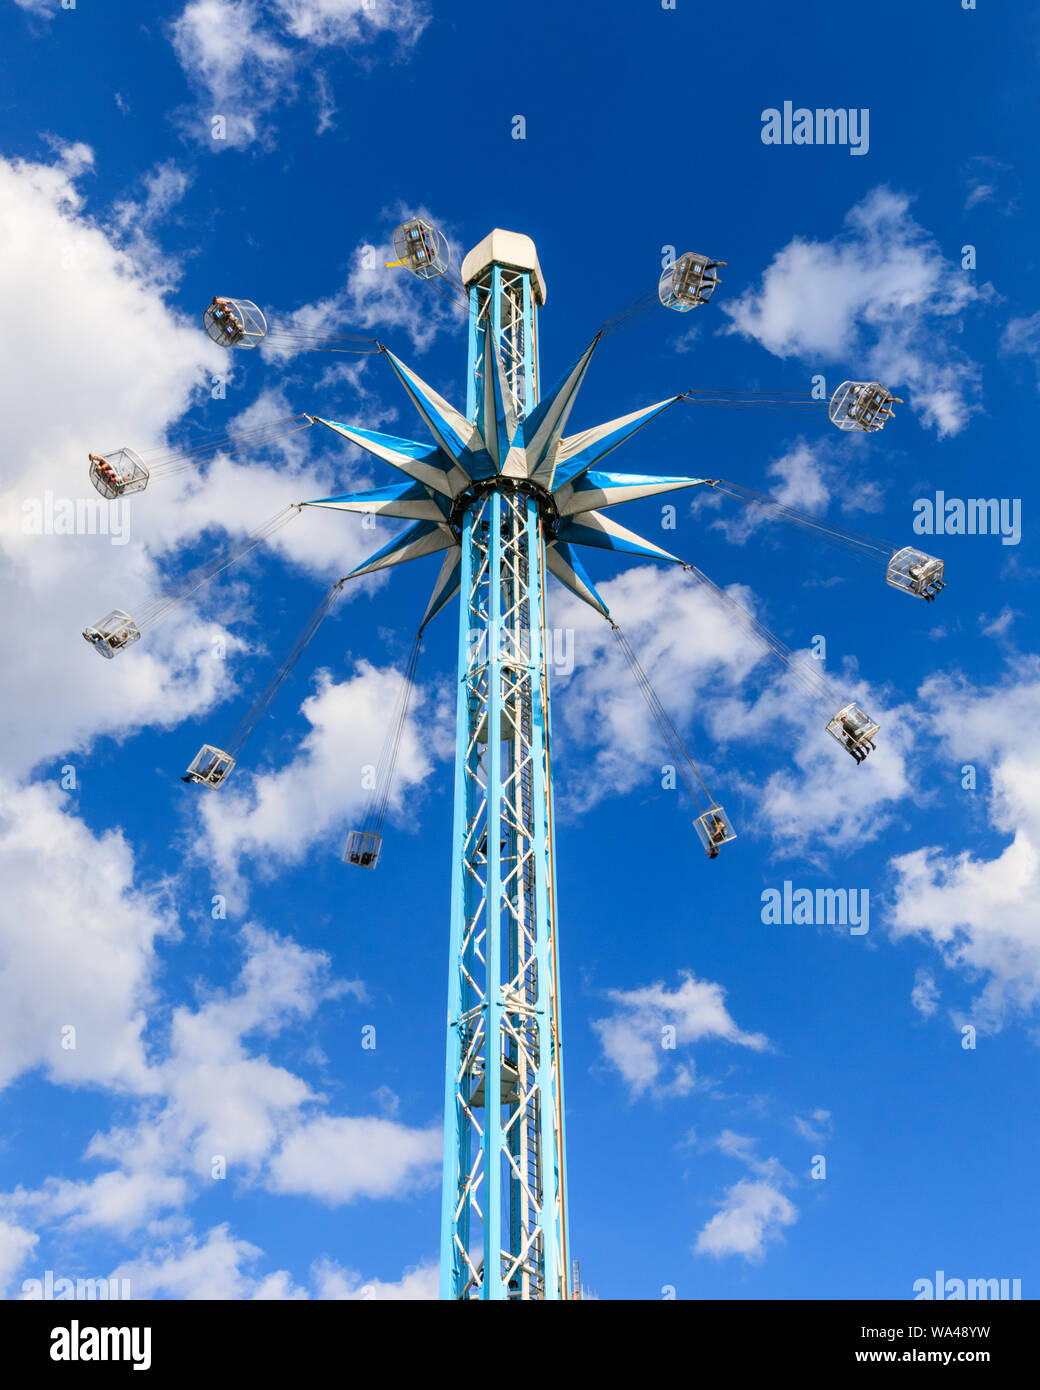 Southbank Starflyer fairground ride, tall funfair attraction, capsules swinging around central pillar against blue summer sky Stock Photo